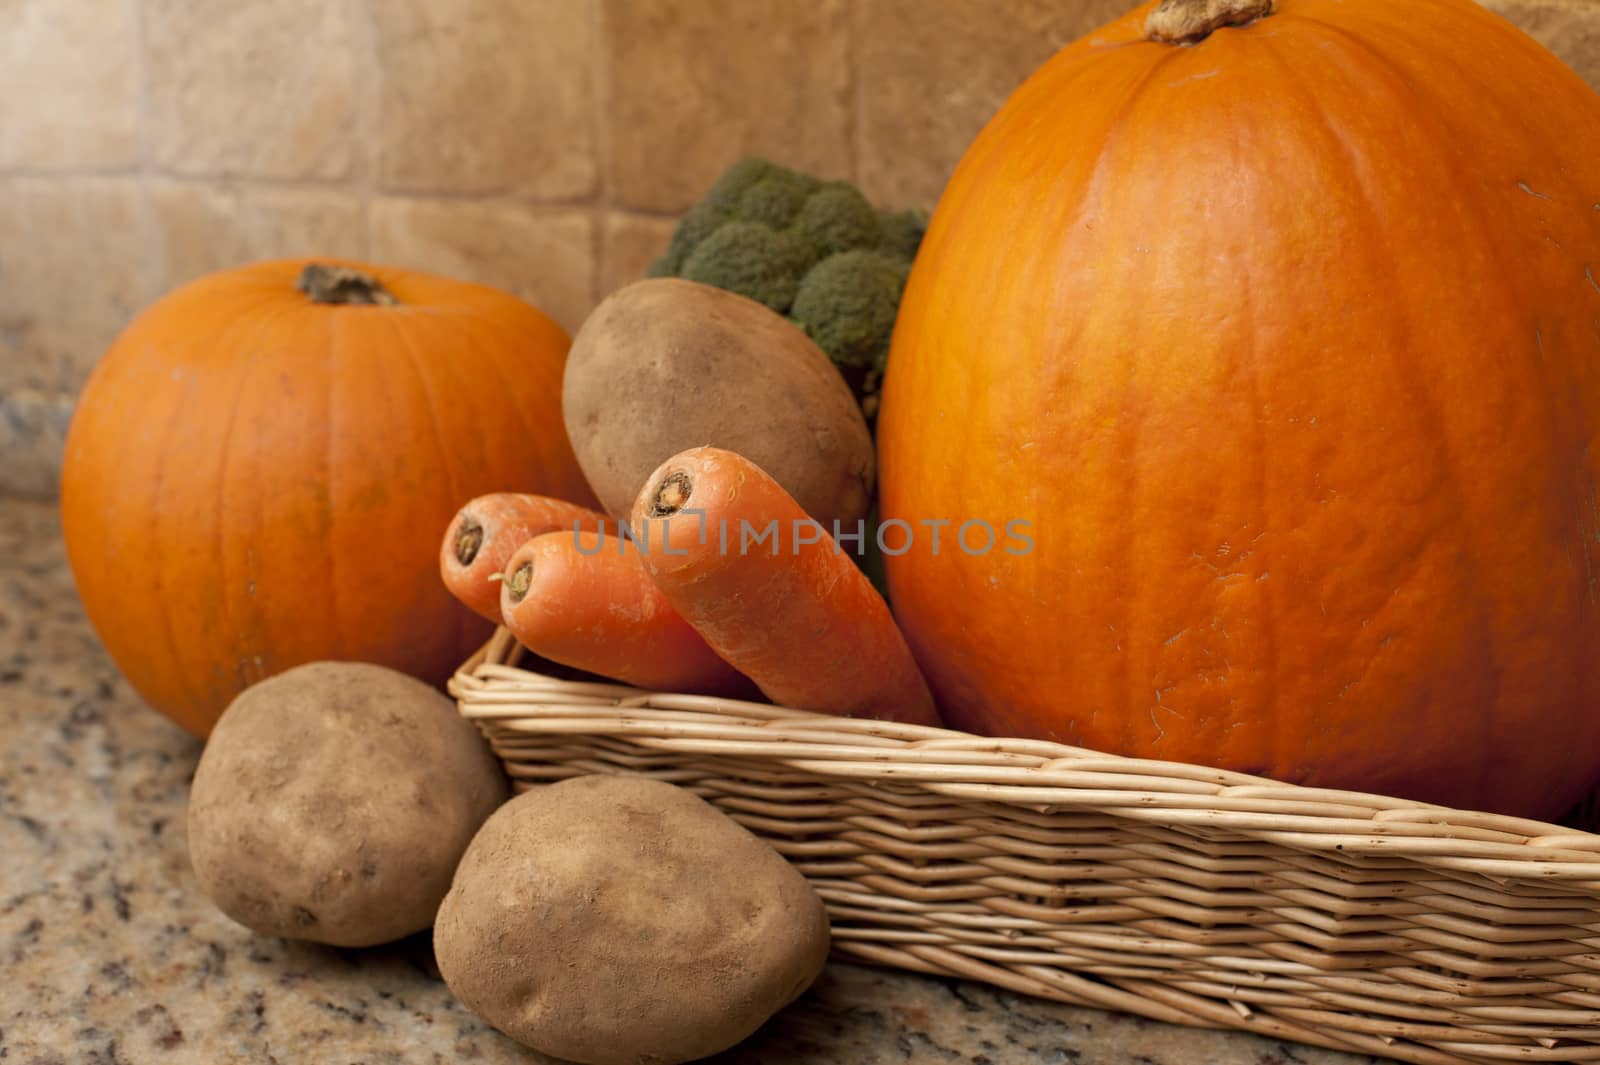 Rectangular wicker basket filled with vegetables such as carrots, potatoes, broccoli and pumpkins